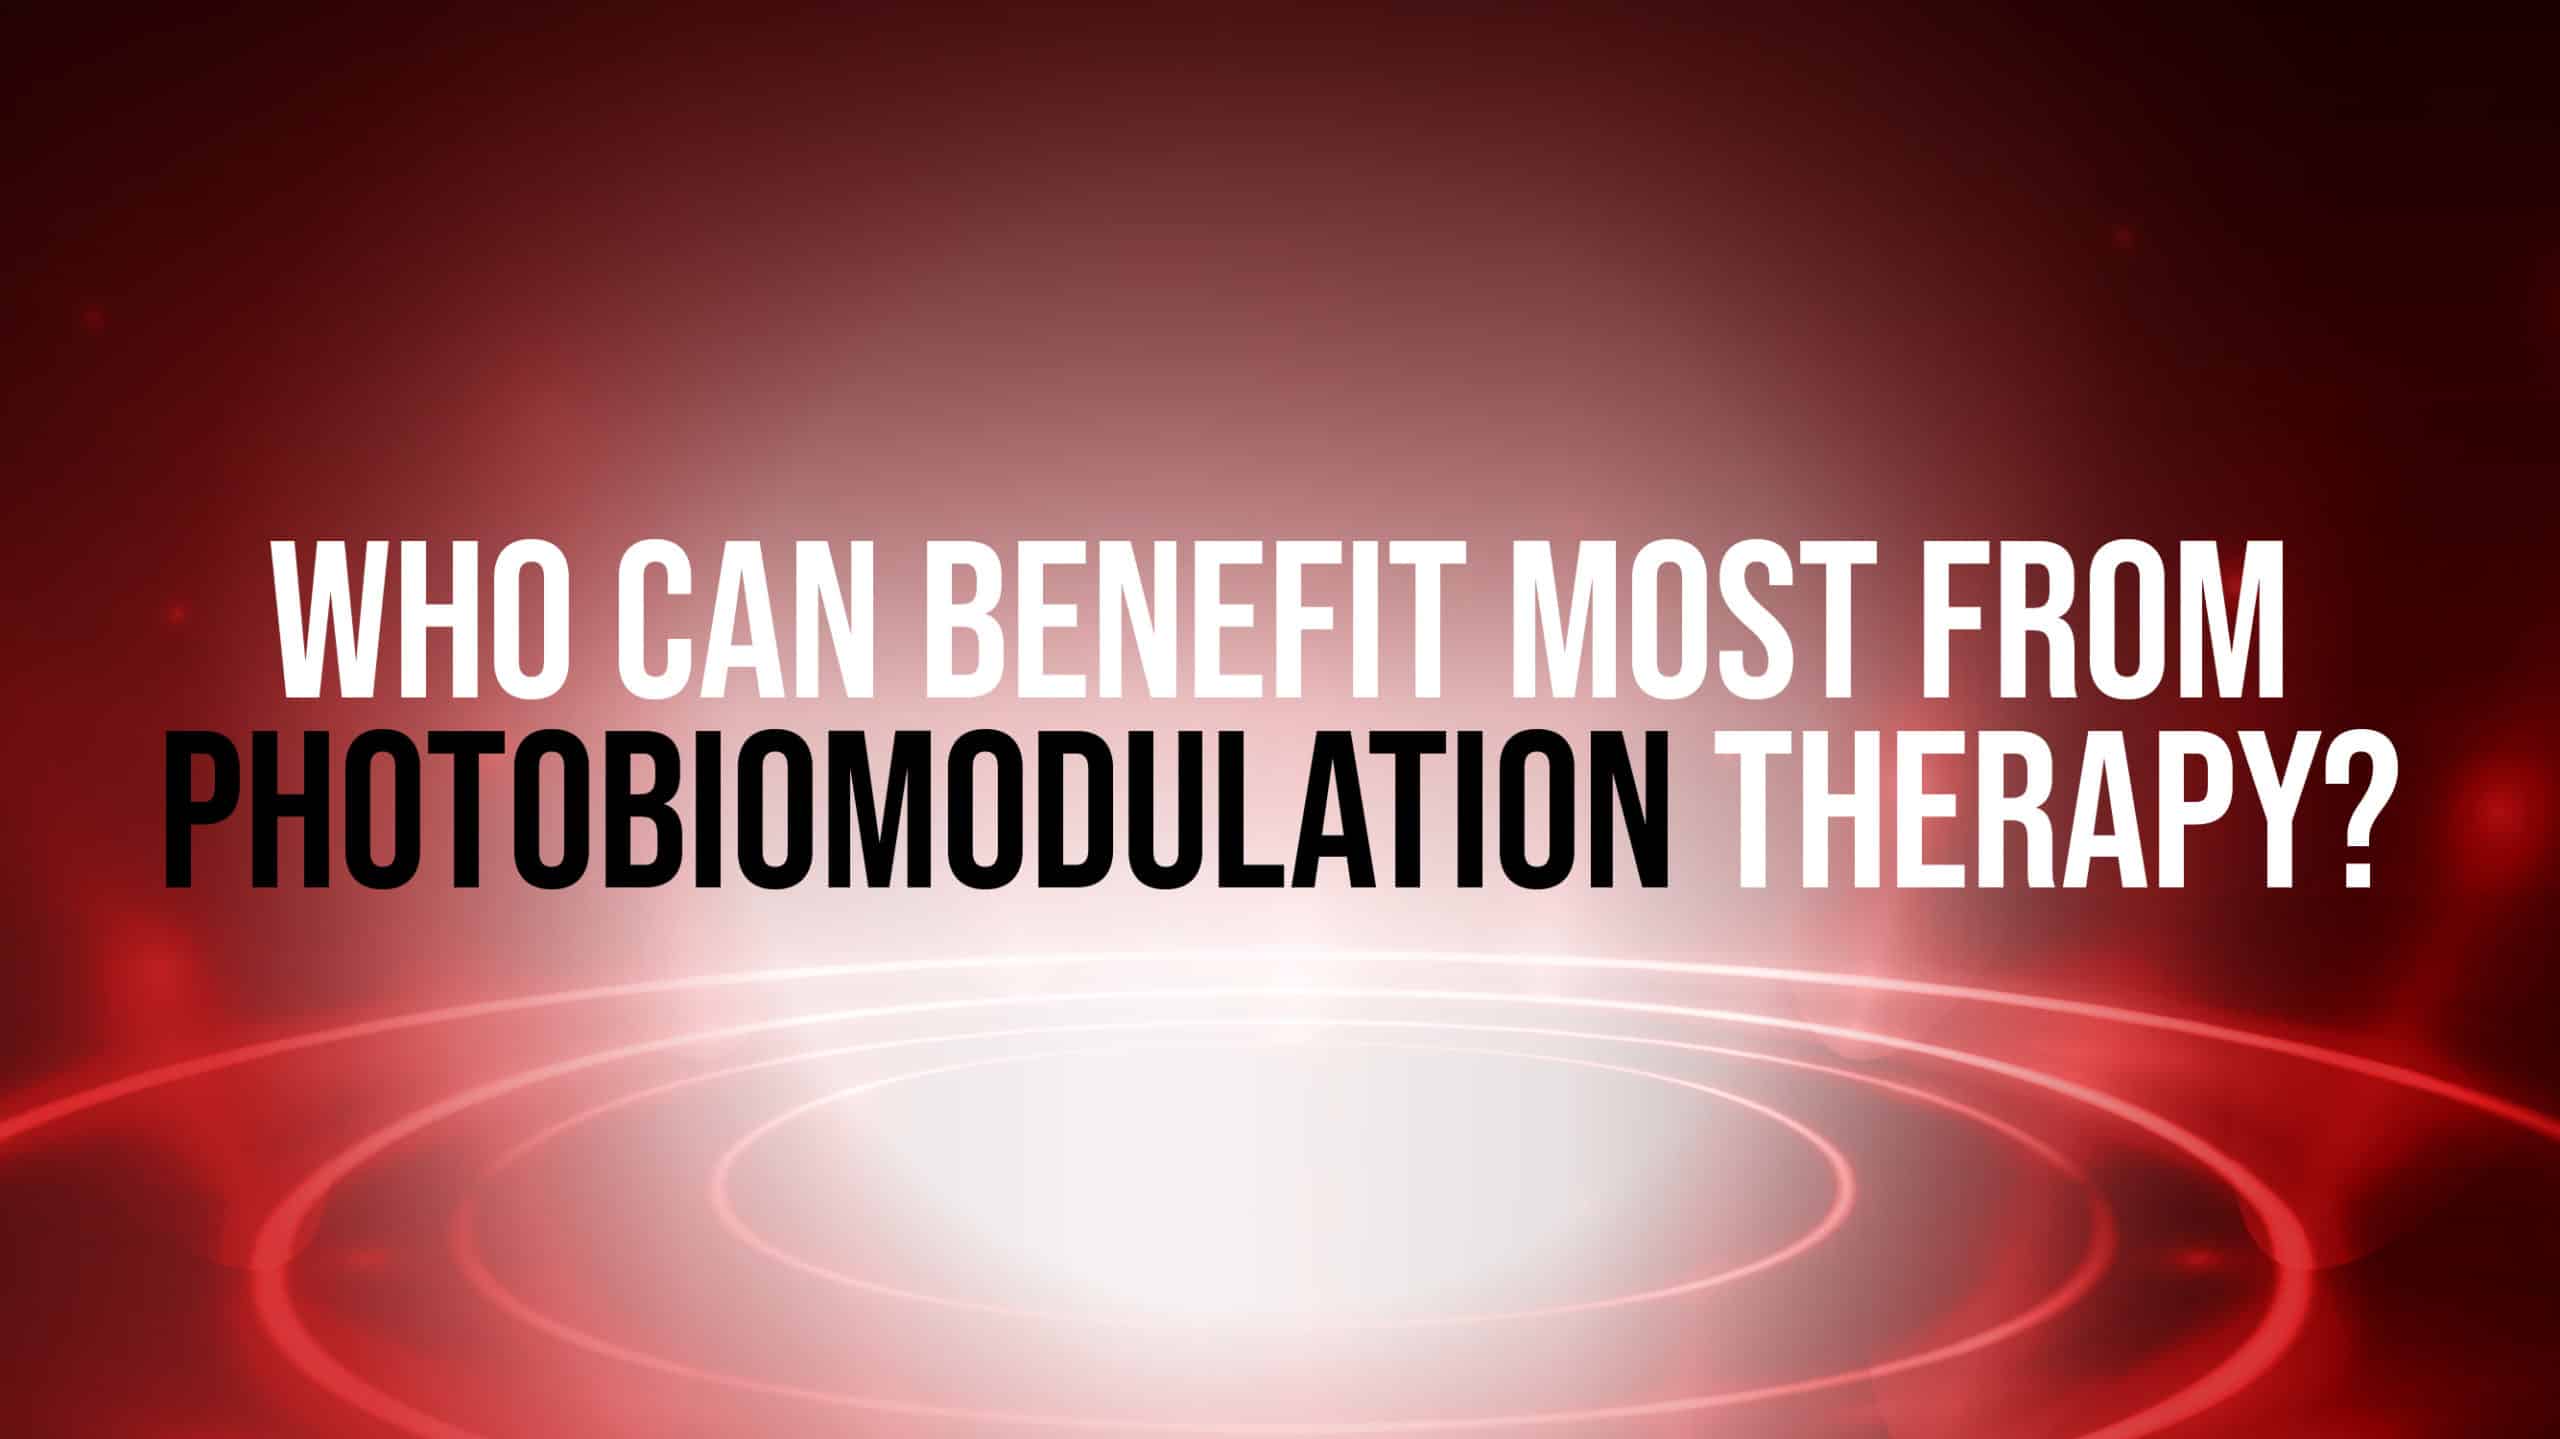 Who Can Benefit Most From Photobiomodulation Therapy? featured image